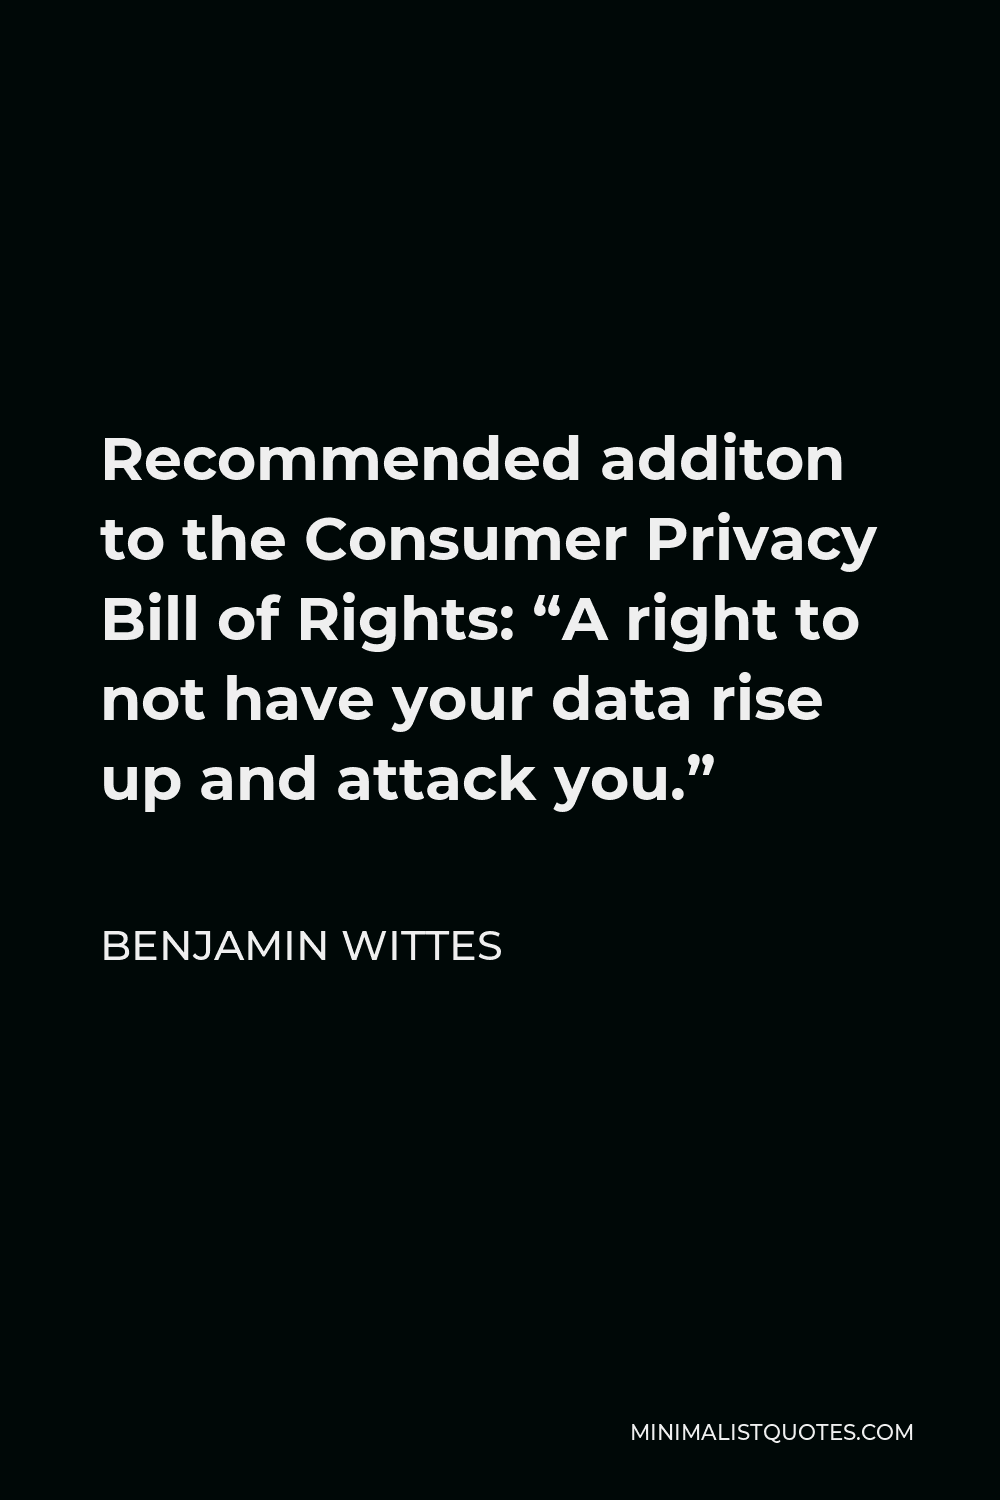 Benjamin Wittes Quote - Recommended additon to the Consumer Privacy Bill of Rights: “A right to not have your data rise up and attack you.”